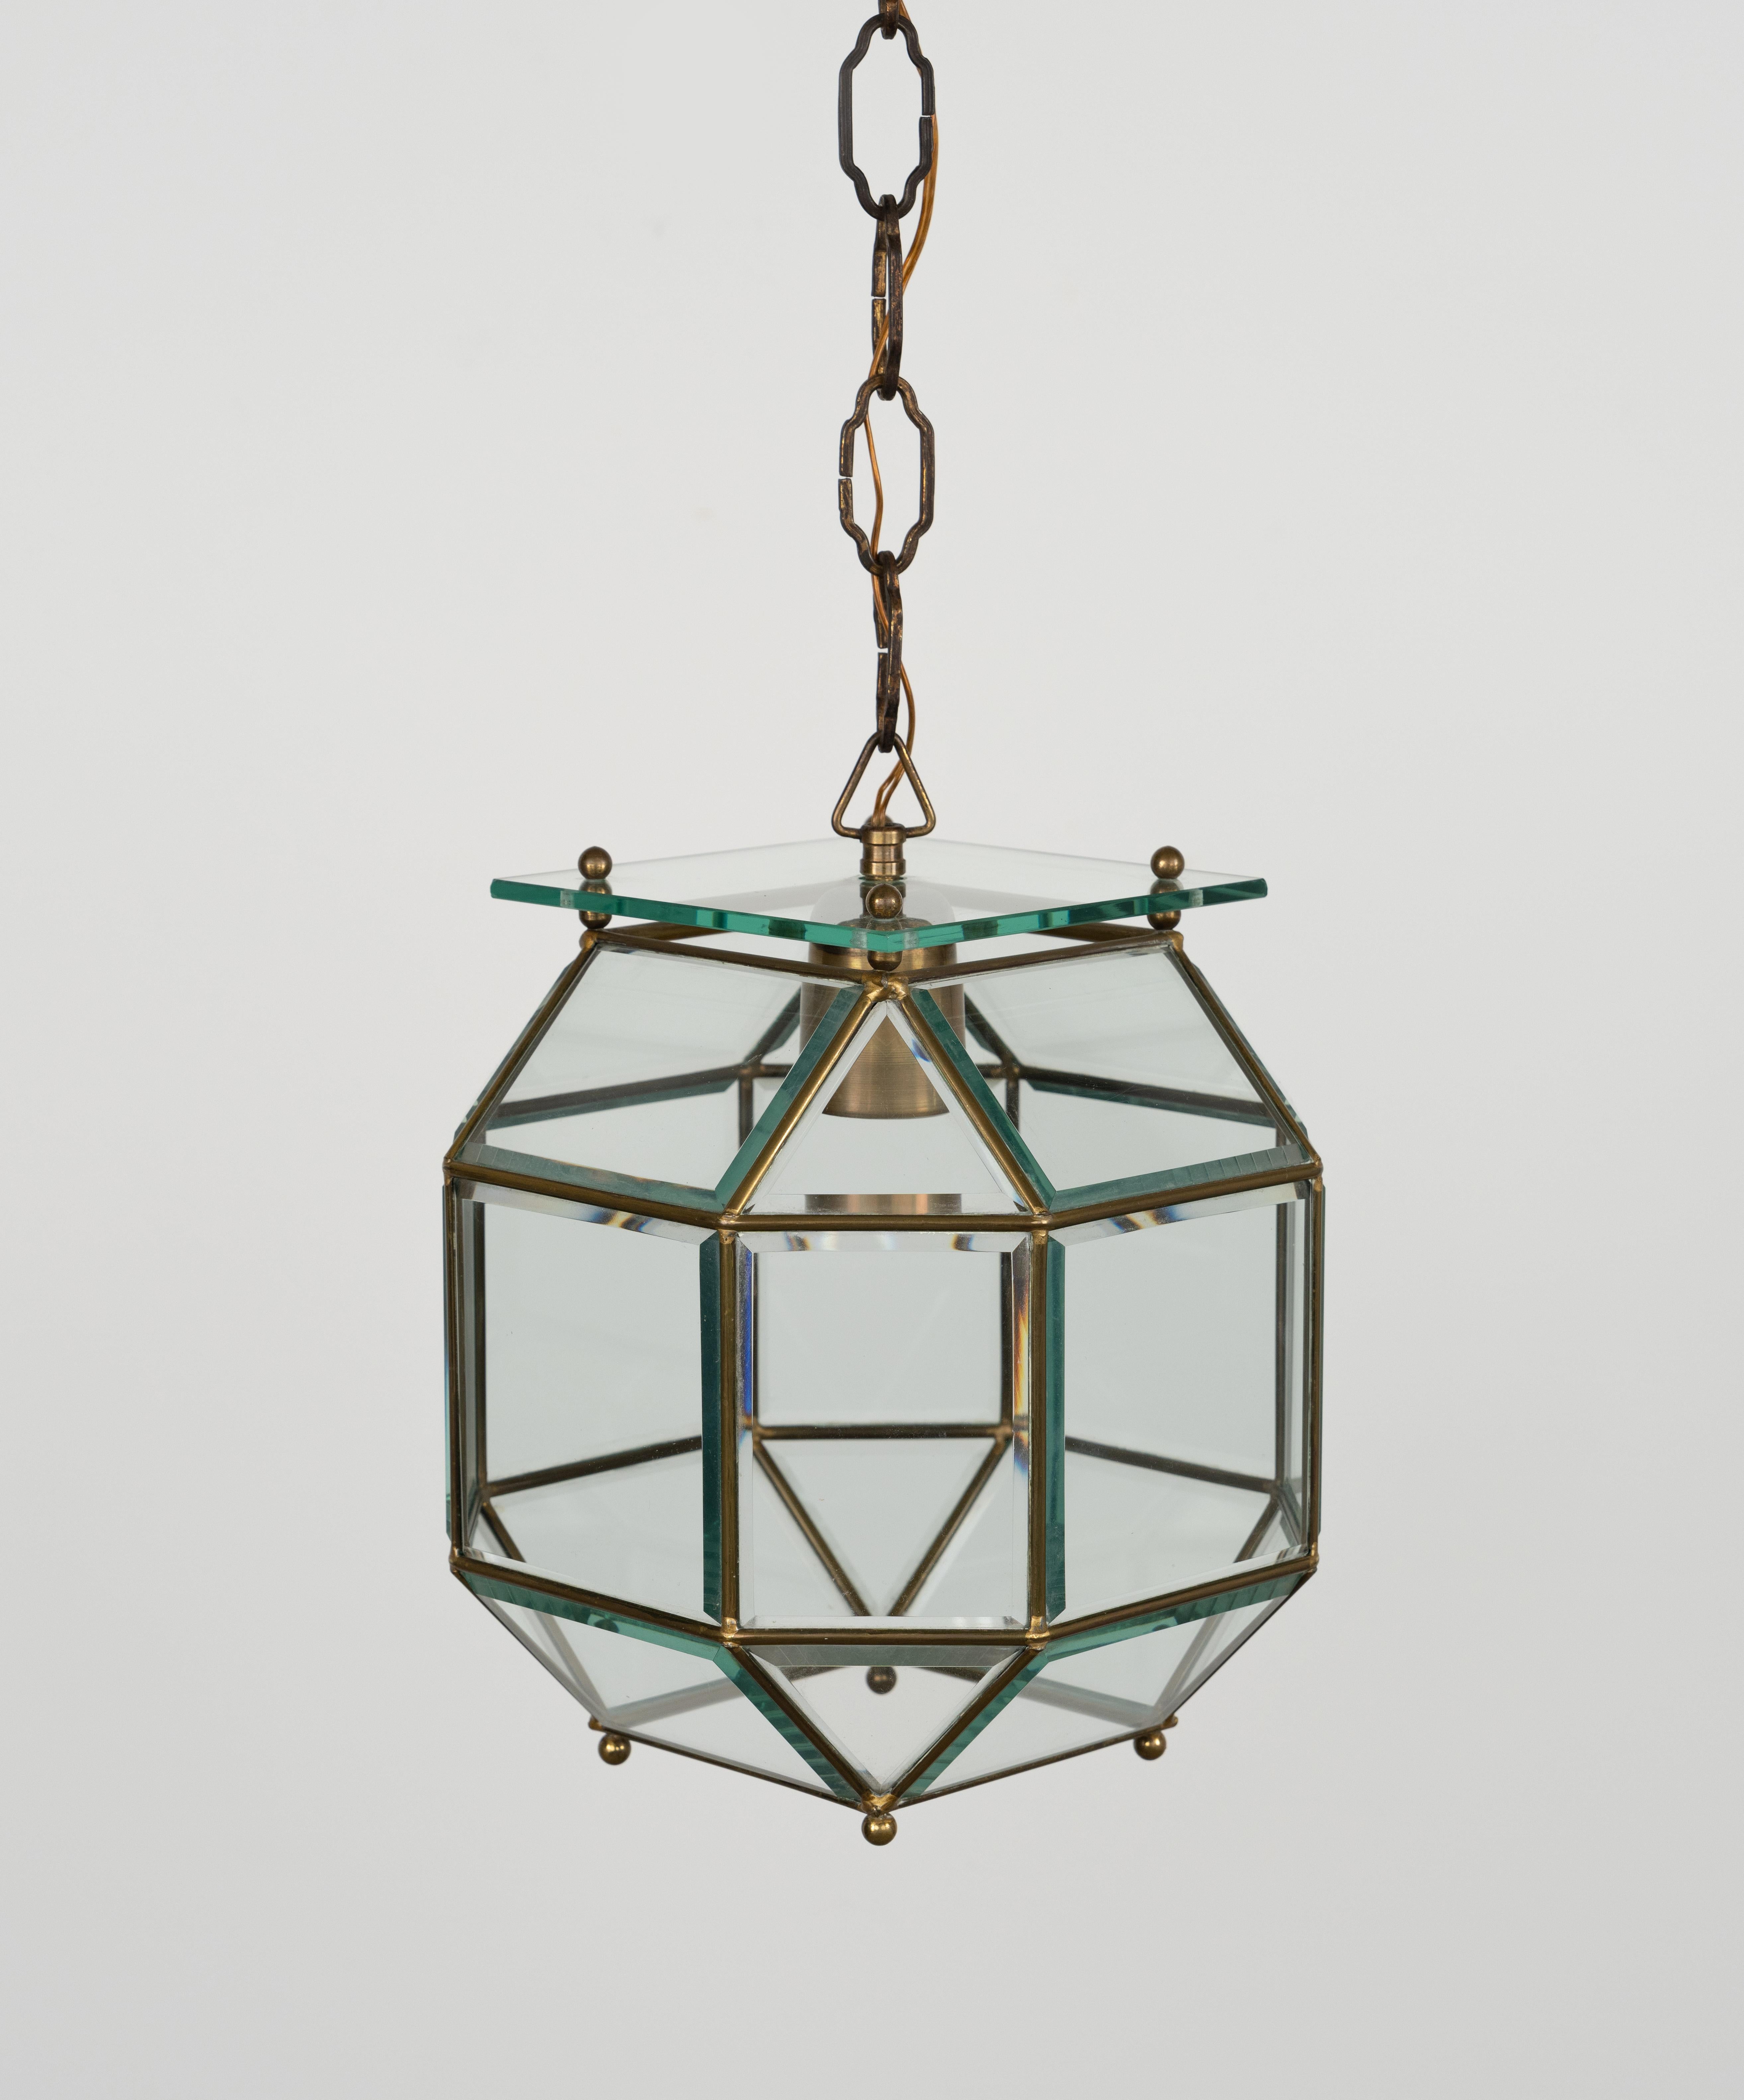 Mid-Century Modern Midcentury Chandelier in Brass and Beveled Glass Adolf Loos Style, Italy 1950s For Sale